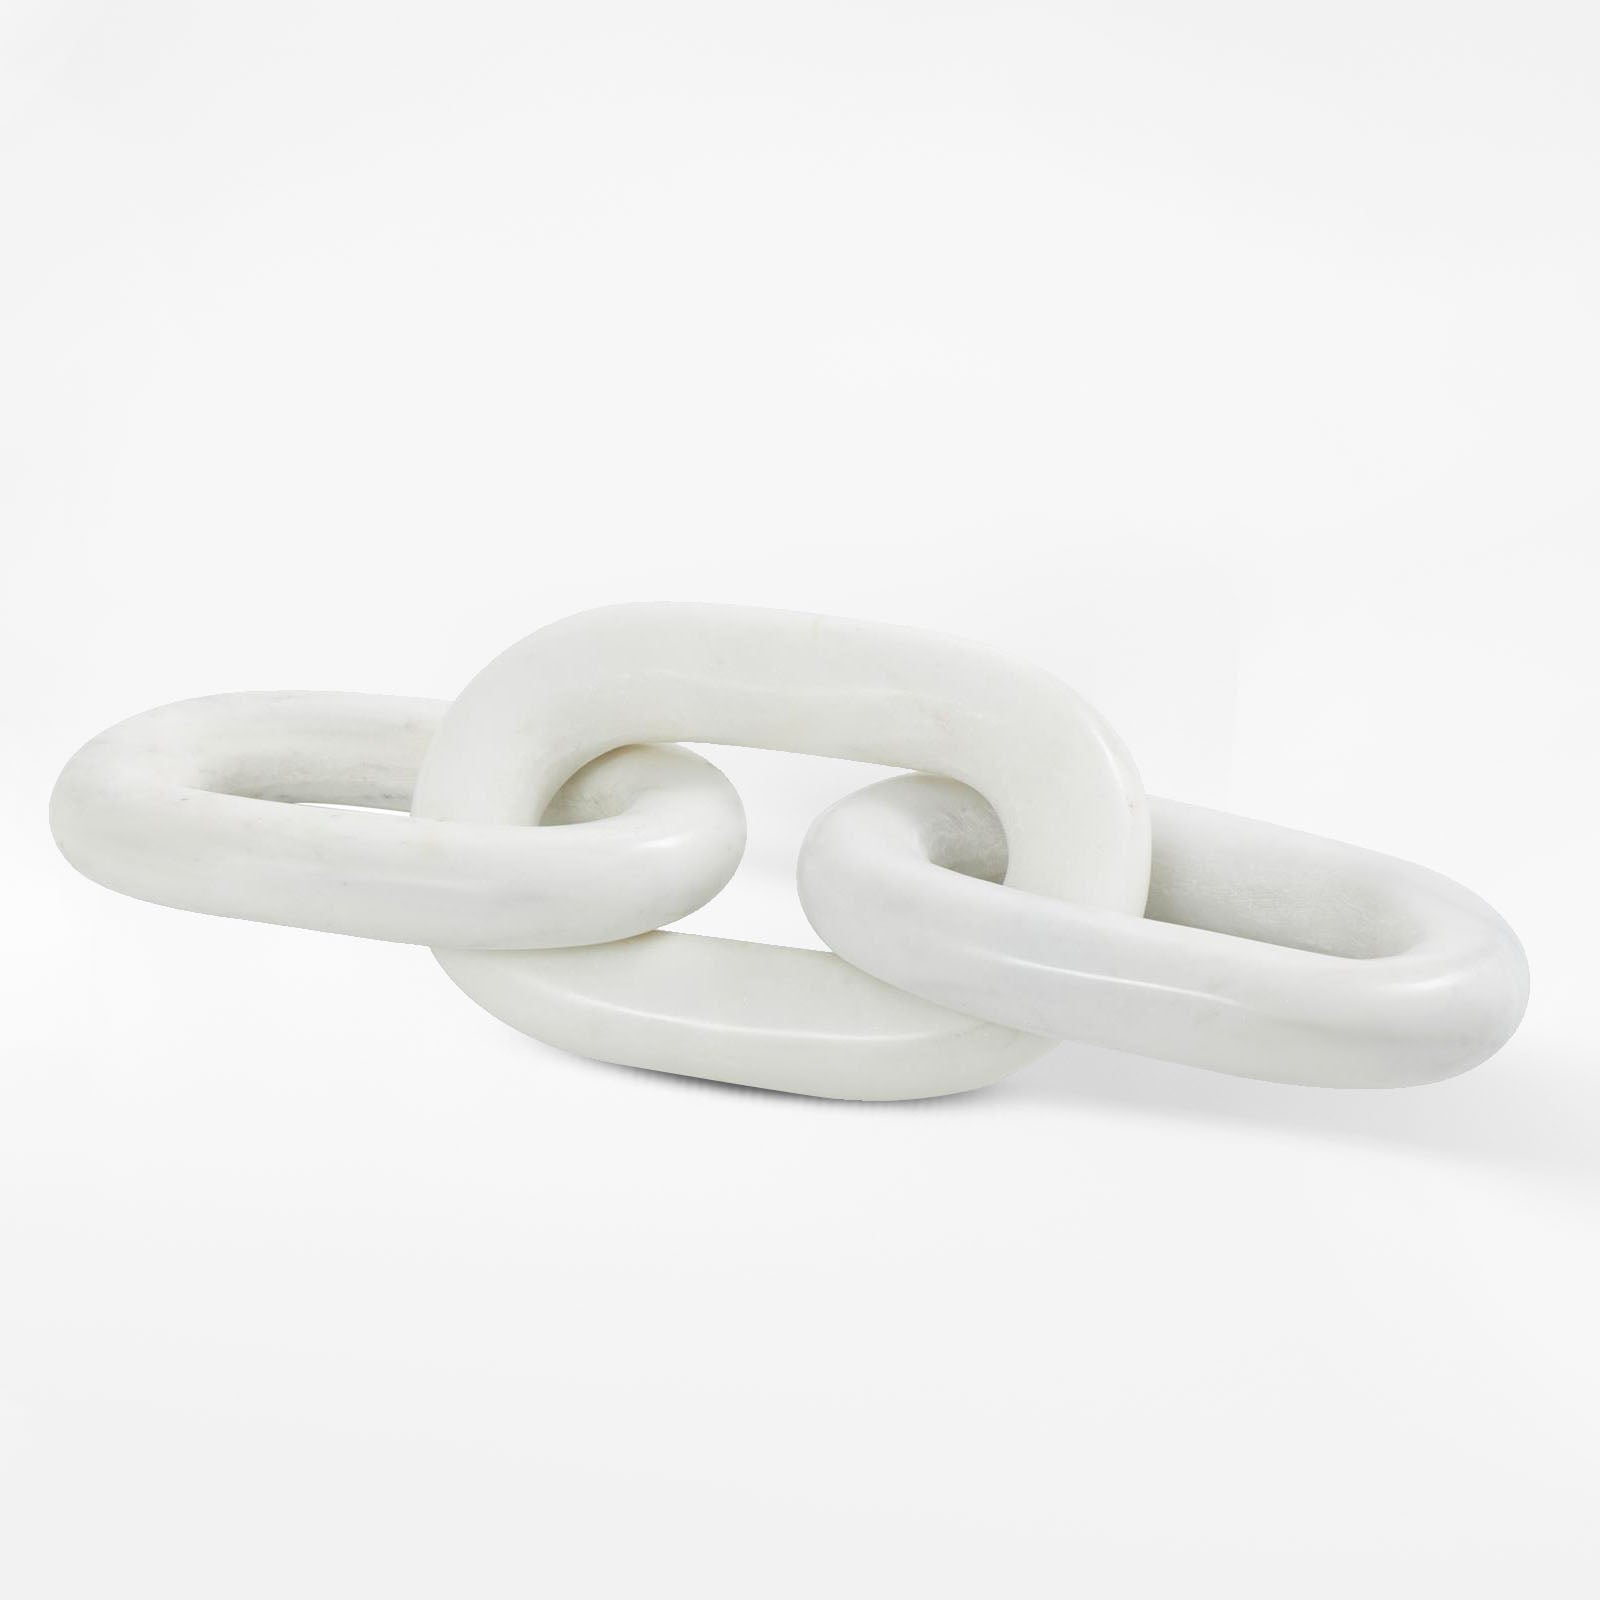 White Marble Chain Geometric 3 Link Sculpture